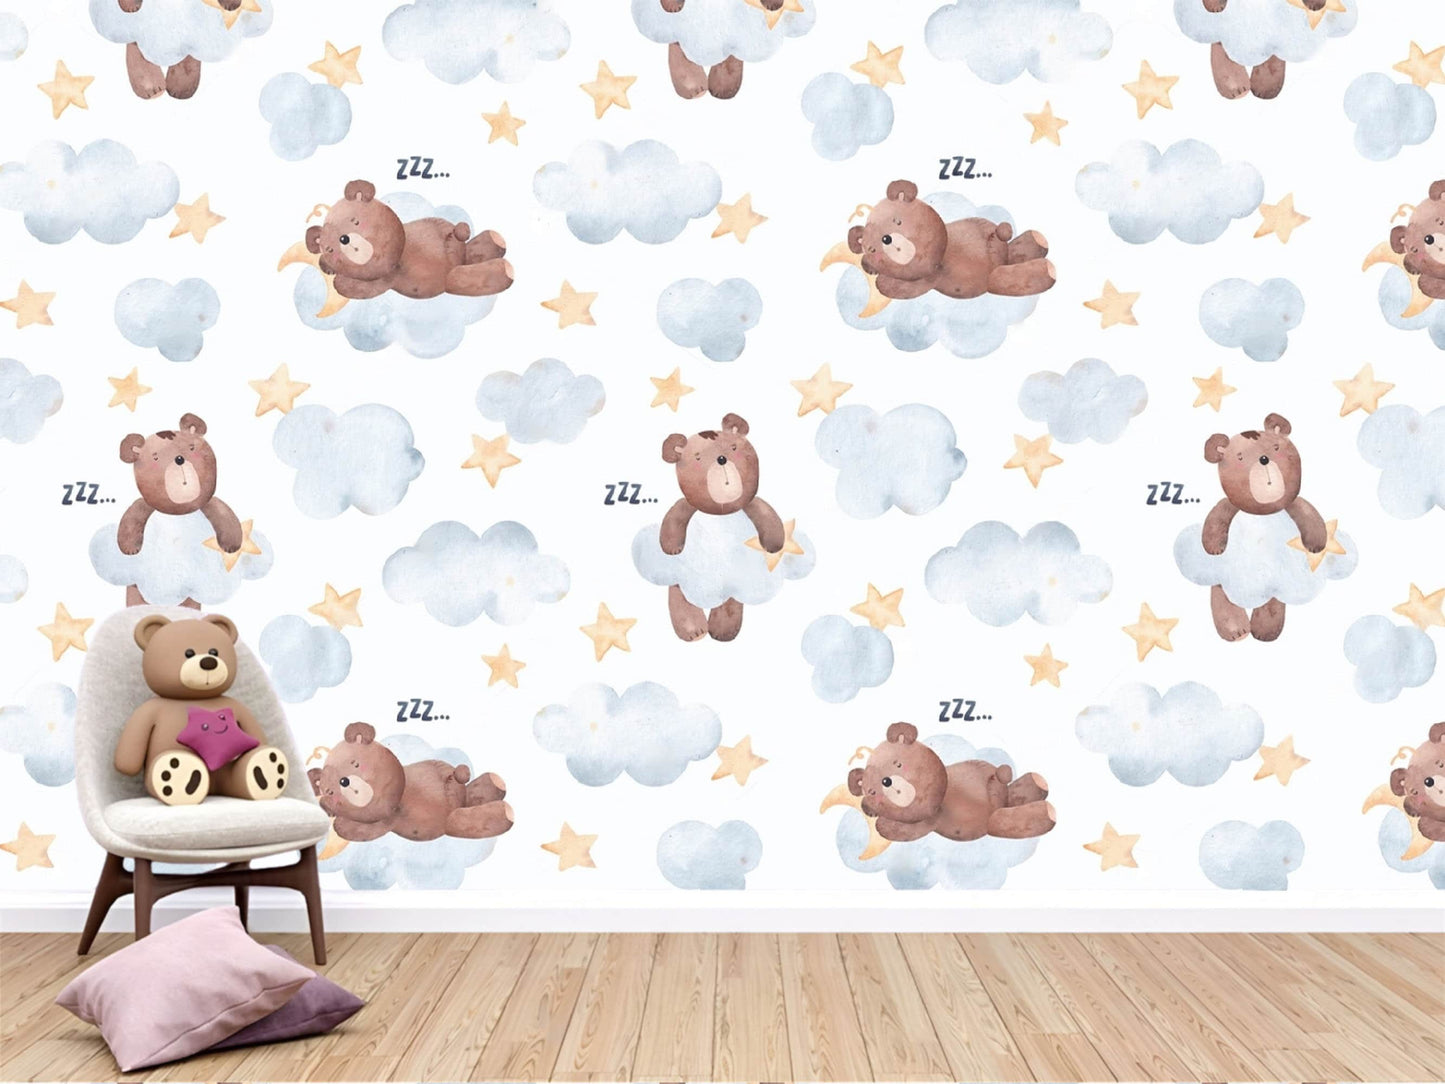 Dreamy clouds wallpaper mural, creating a peaceful and dreamlike ambiance in the nursery.